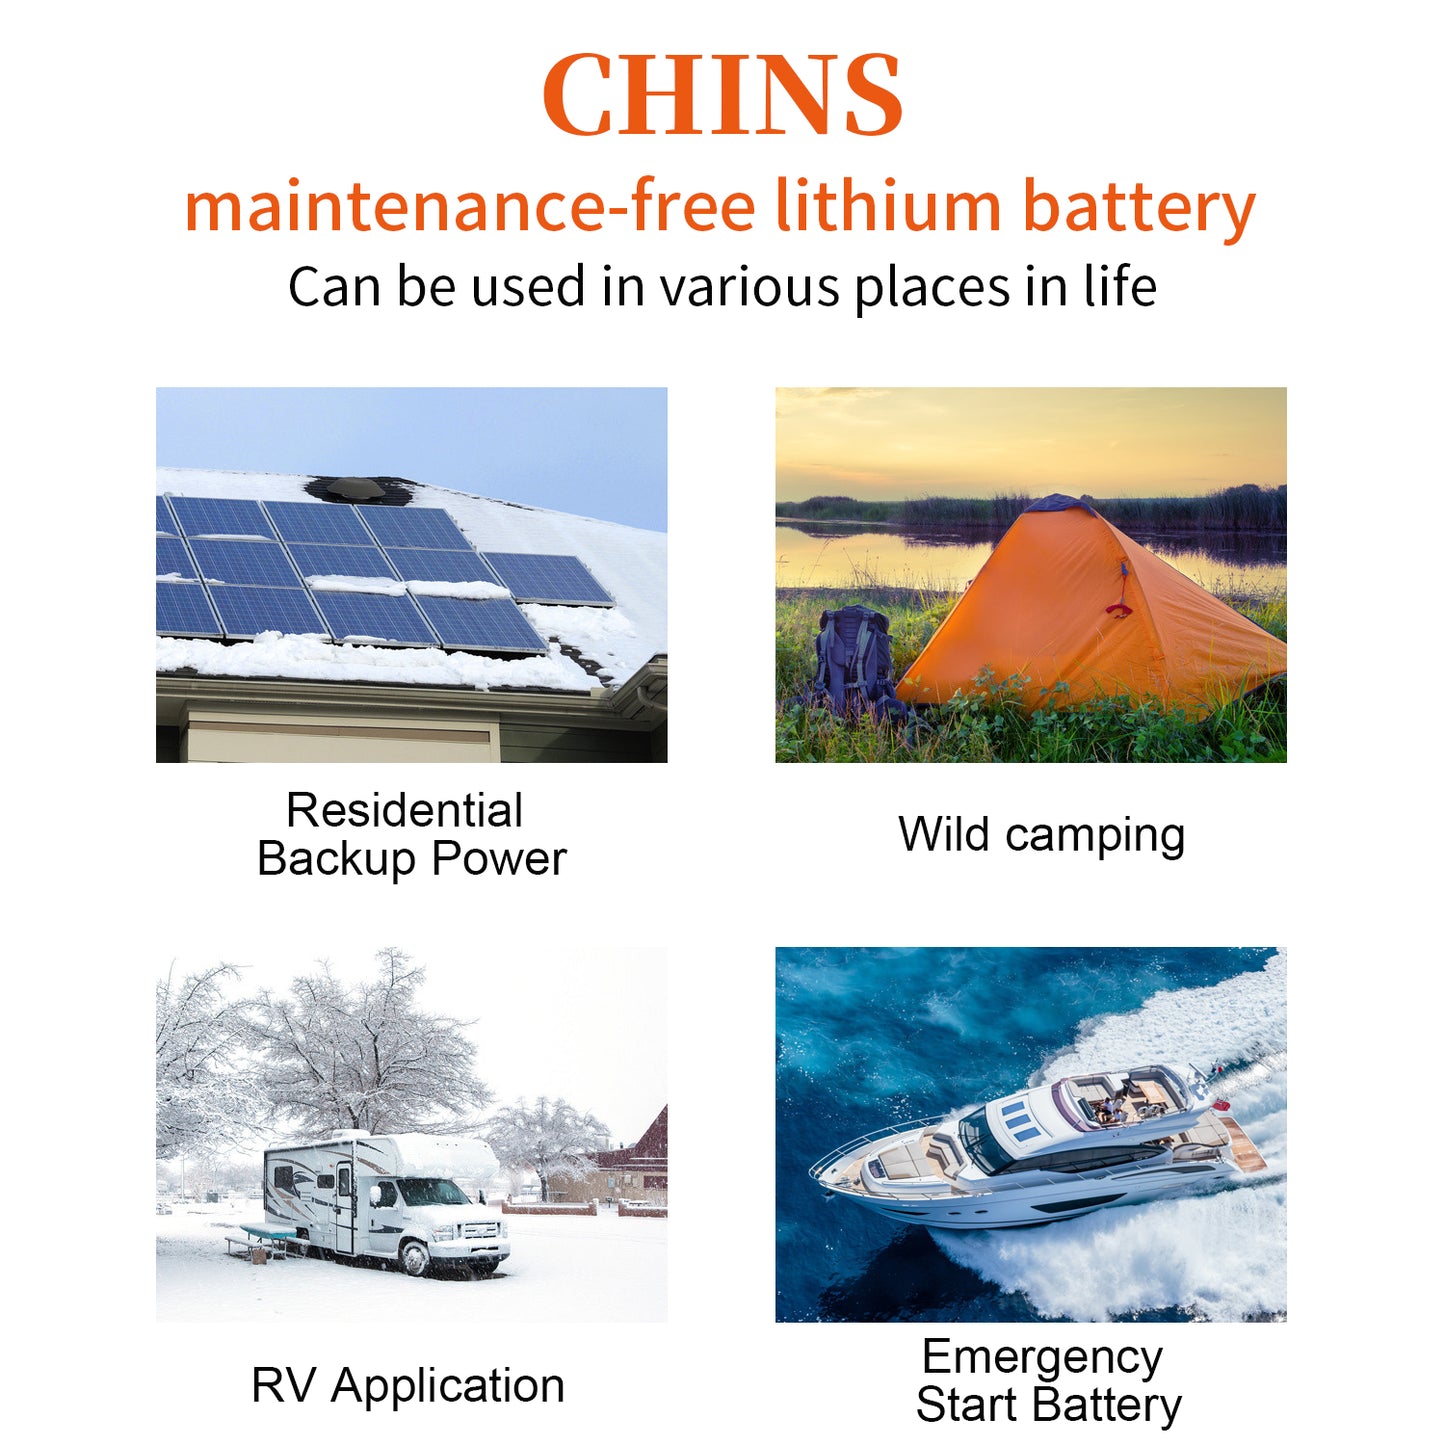 CHINS Smart 12.8V 100AH Lithium Battery, Support Low Temperature Charging (-31°F), Built-in 100A BMS, 2000+ Cycles, Mobile Phone APP Monitors Battery SOC Data